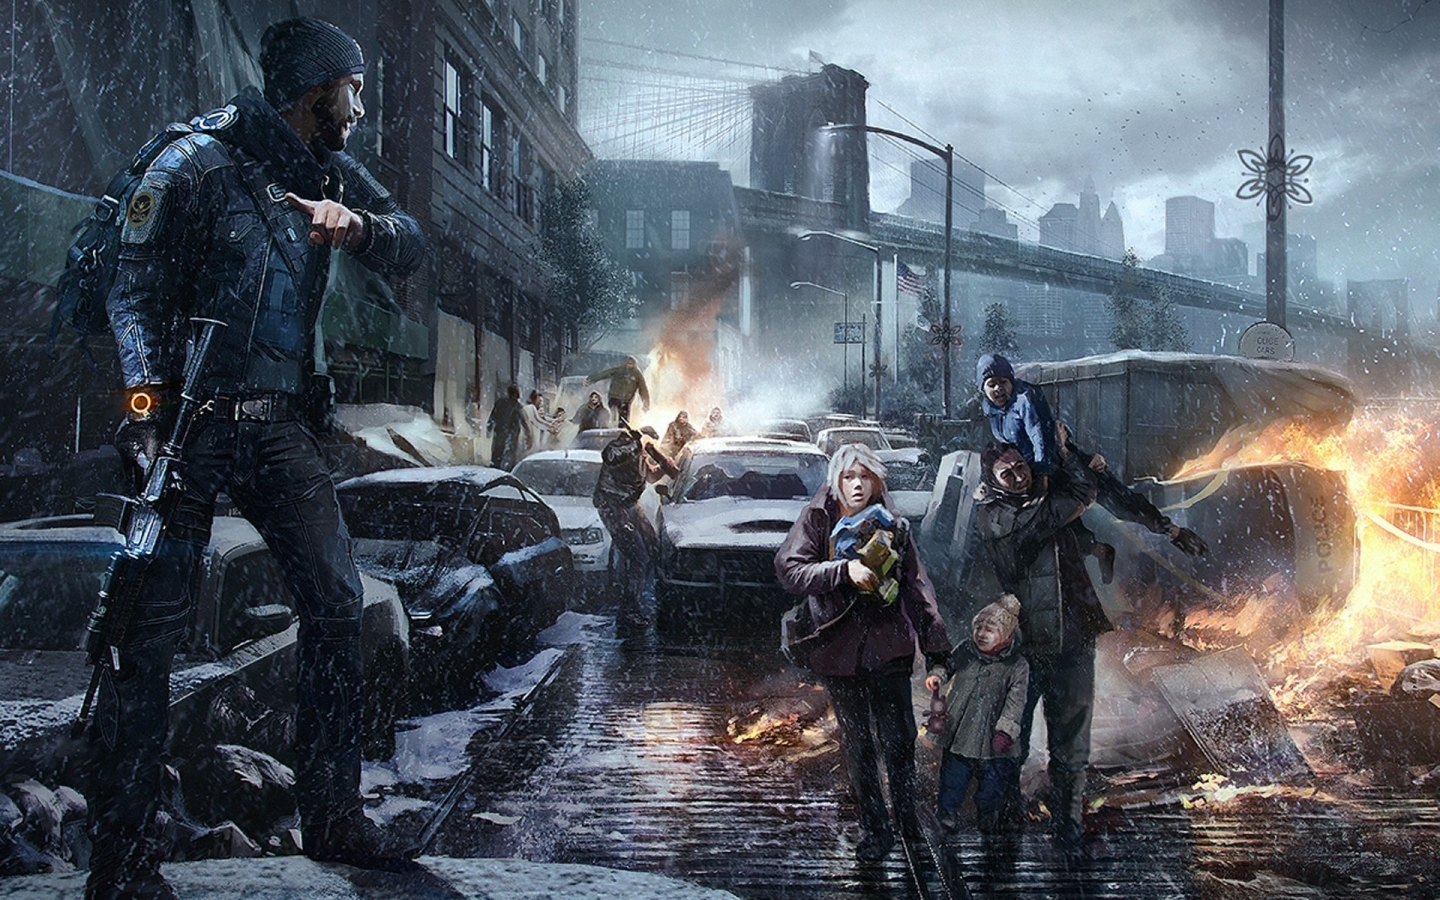 Tom Clancy The Division Fan Art for 1440 x 900 widescreen resolution